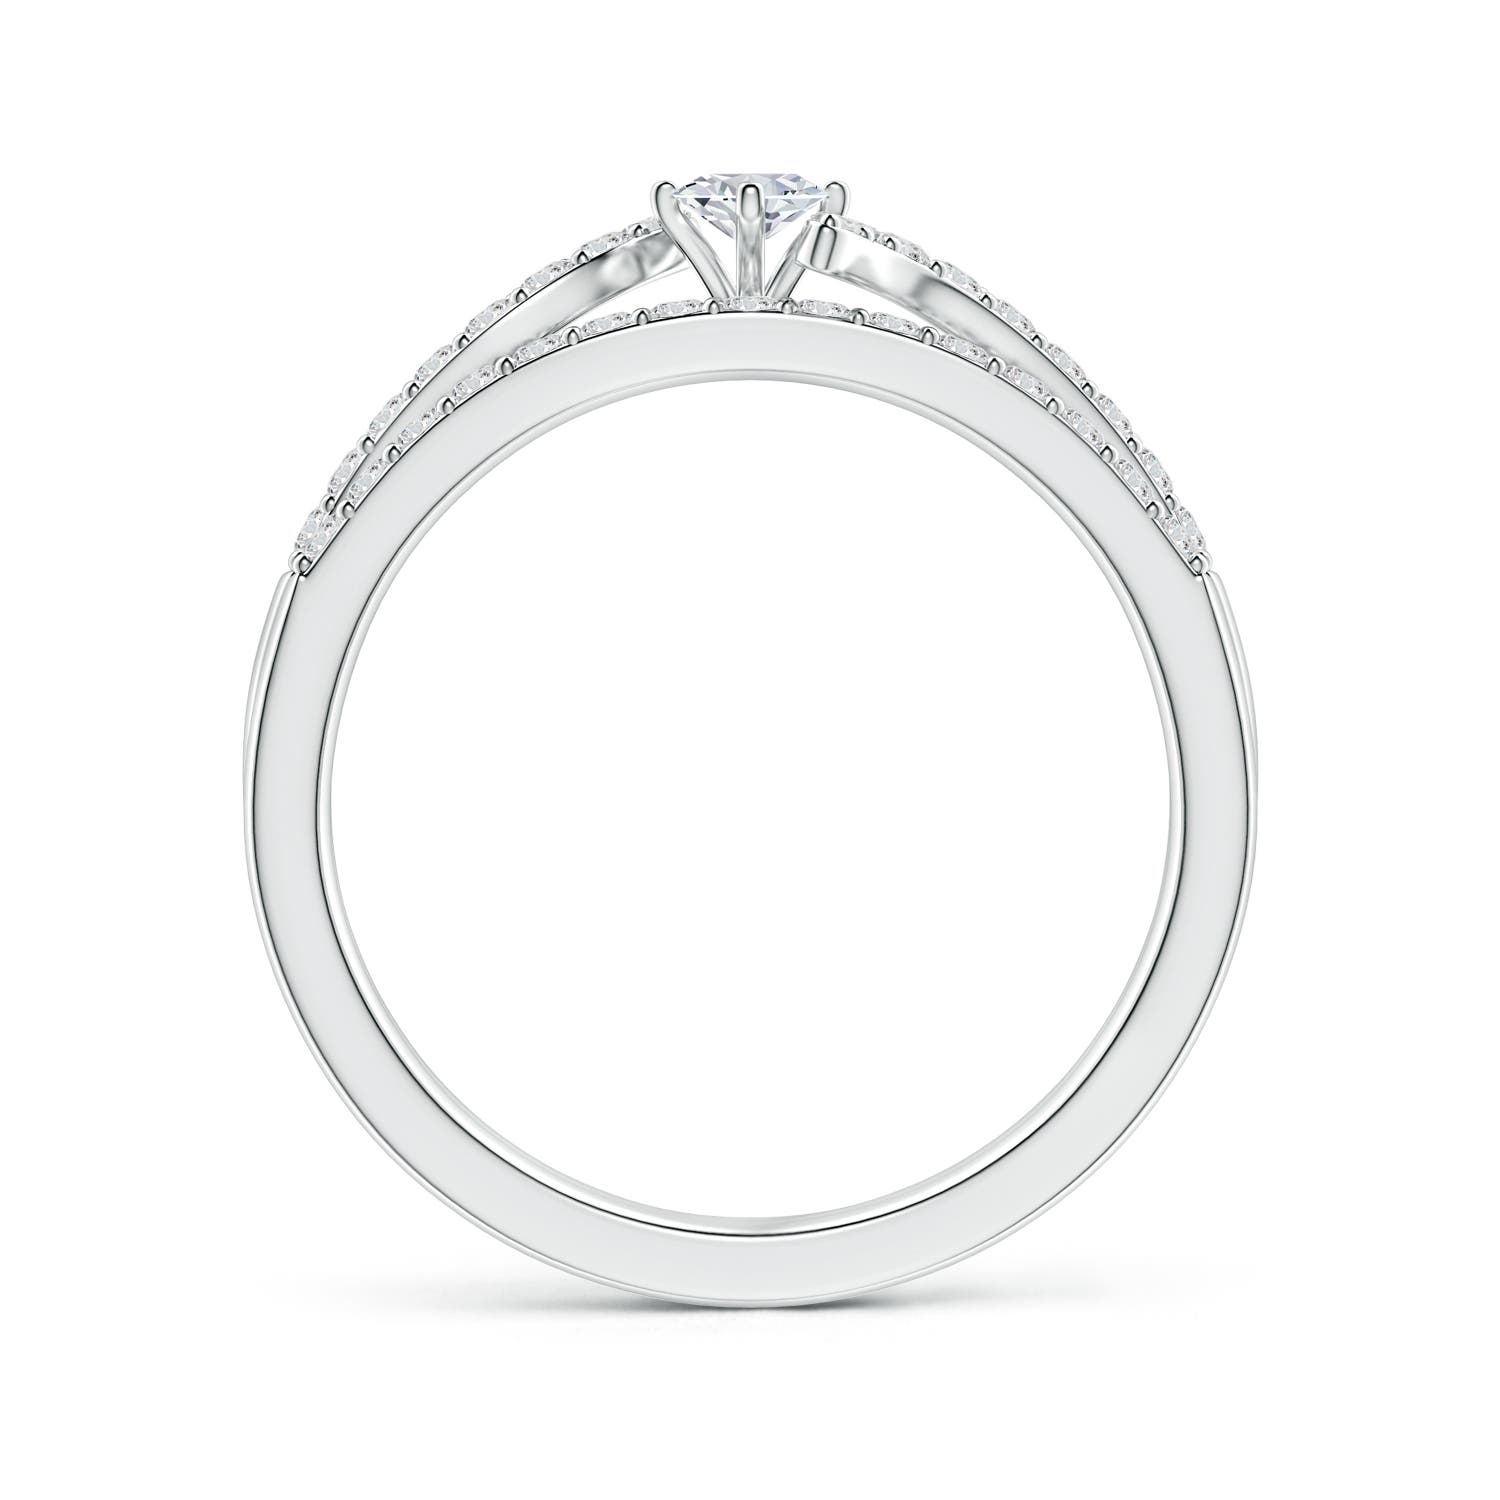 H, SI2 / 0.63 CT / 14 KT White Gold